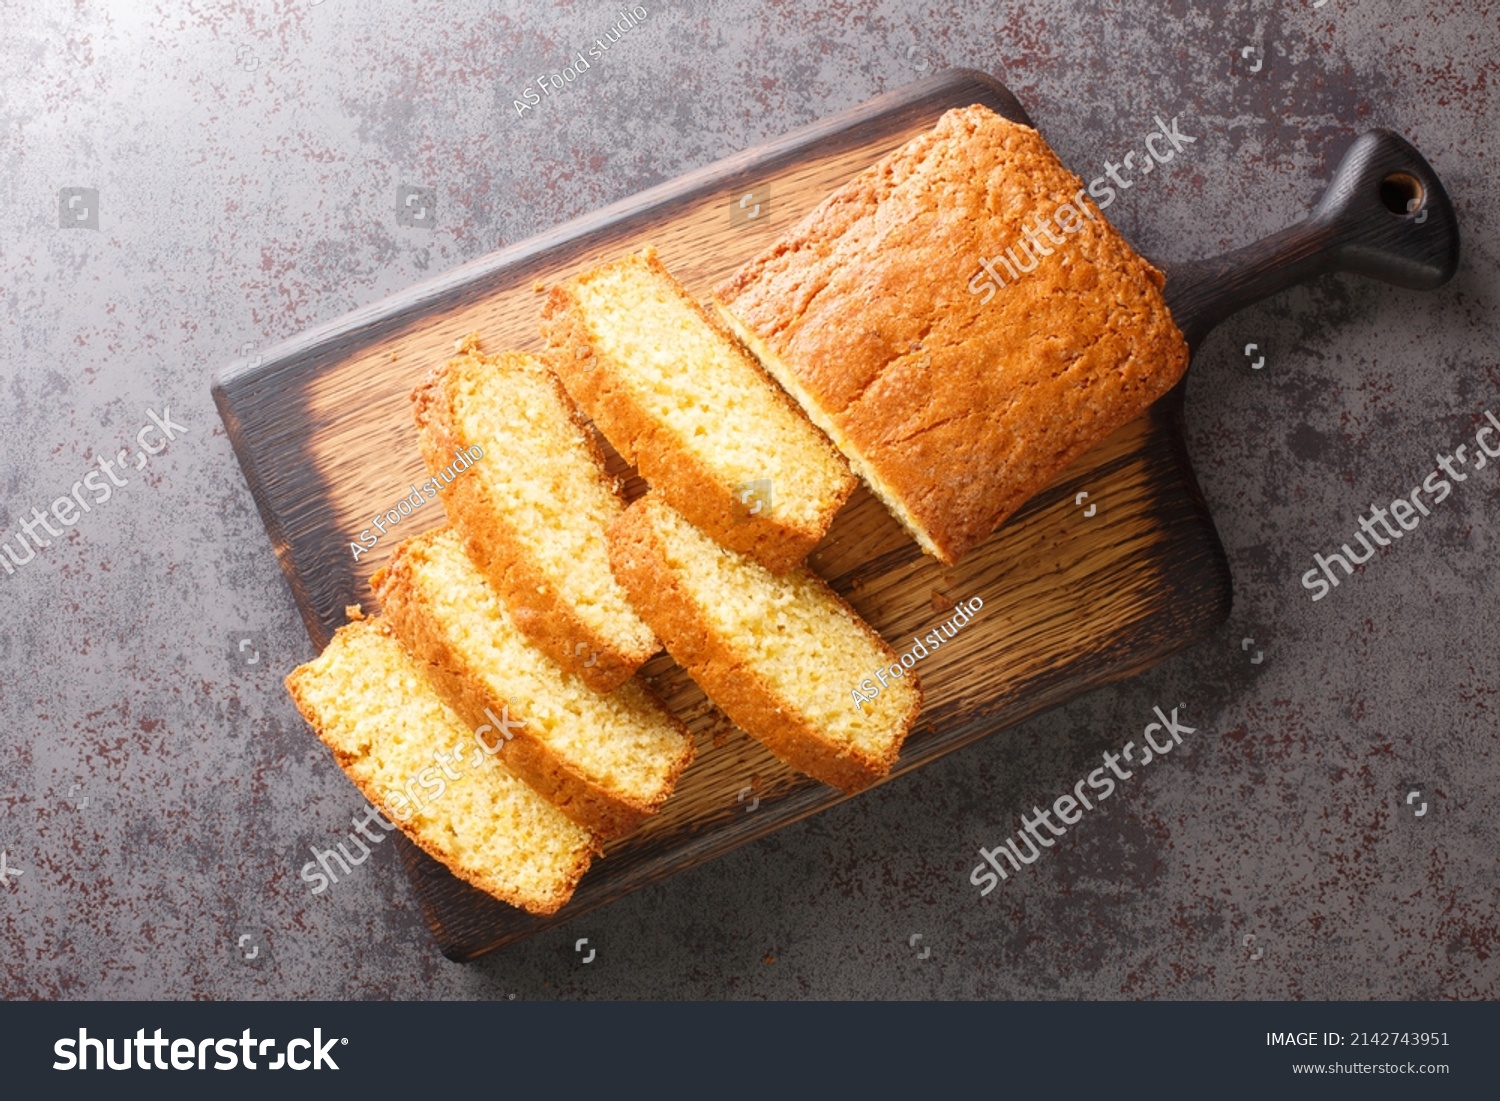 Delicious tender Madeira biscuit cake close-up on a wooden board on the table. horizontal top view from  above #2142743951